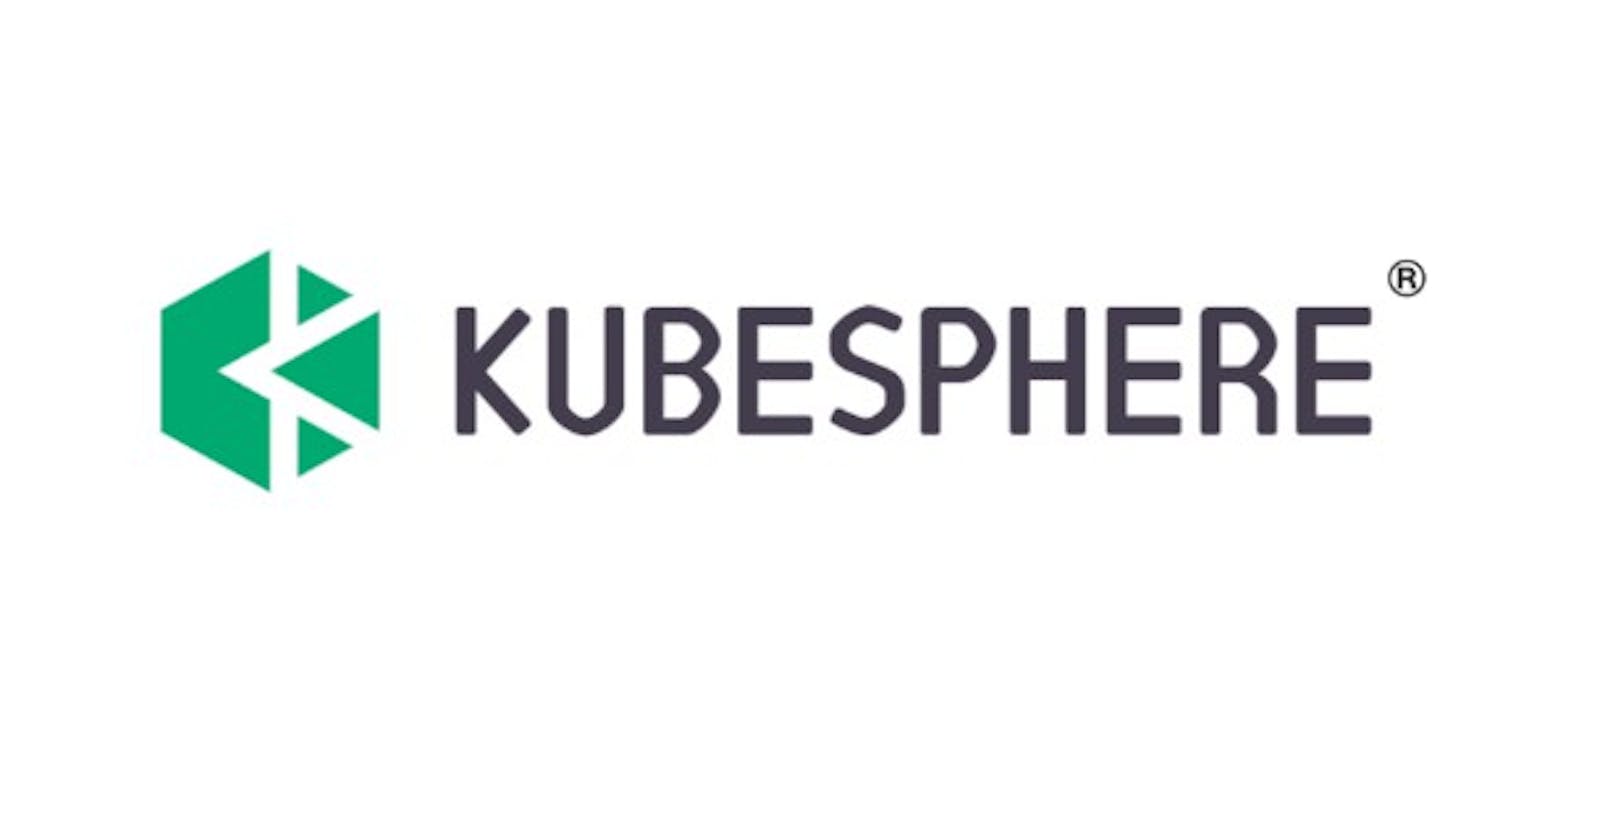 A Simplified Guide To Kubesphere